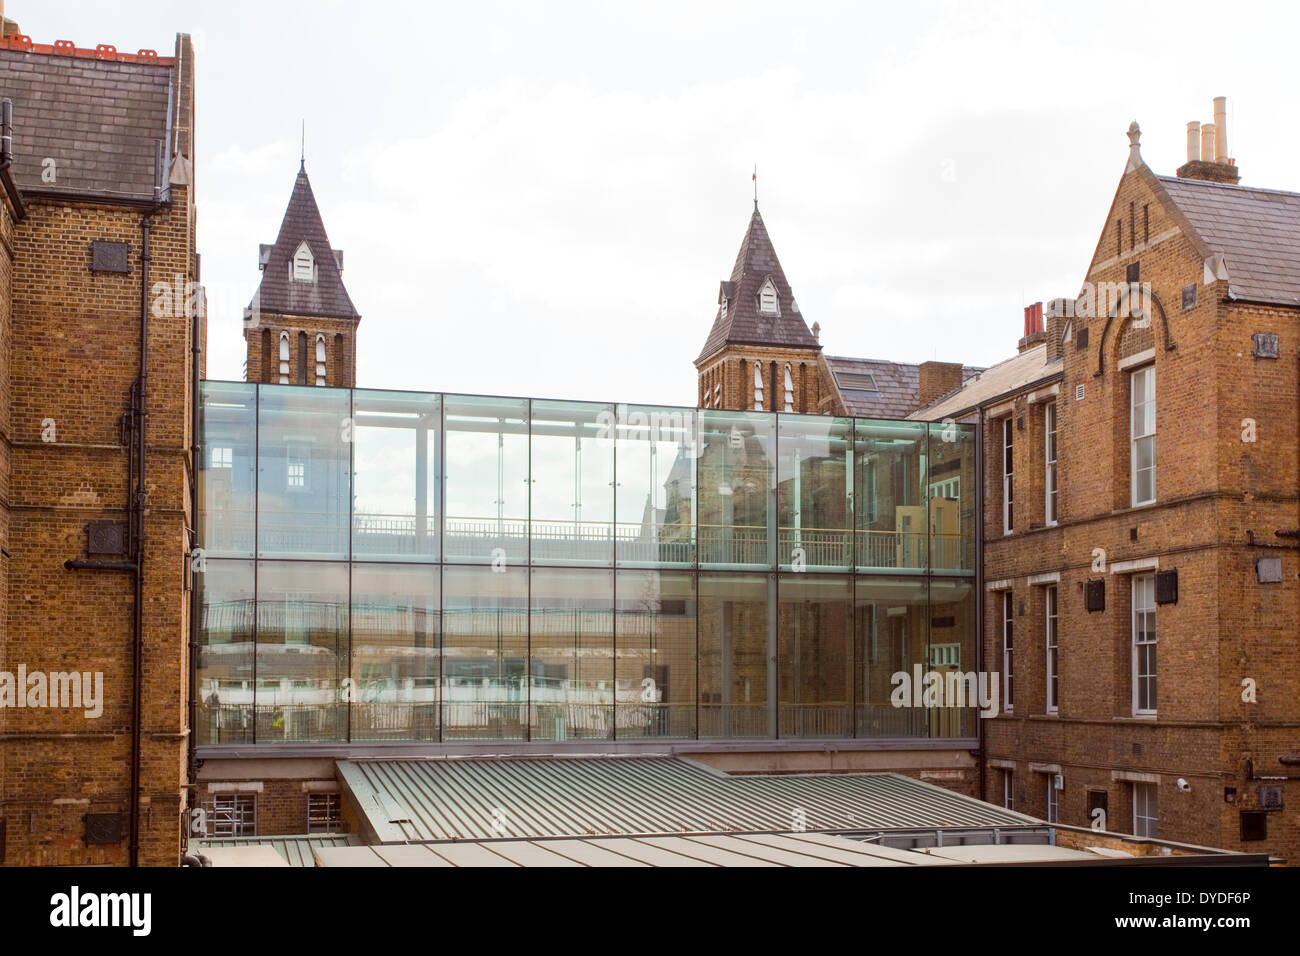 Glass link walkway joining two buildings at Saint Charles Hospital in London. Stock Photo